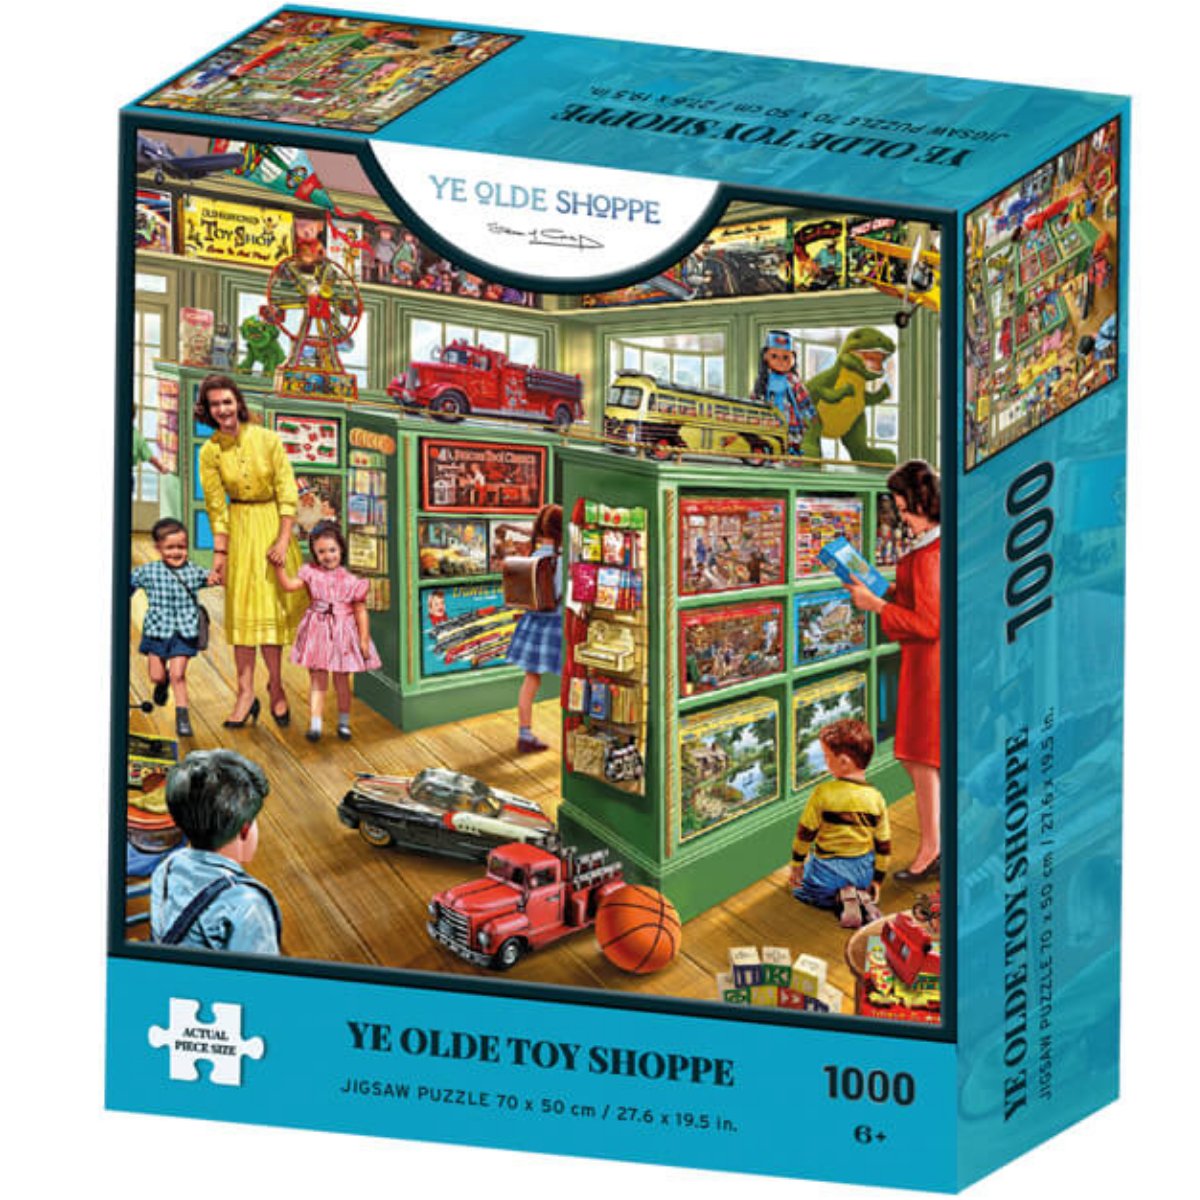 Ye Olde Toy Shoppe Jigsaw Puzzle (1000 Pieces) - Phillips Hobbies